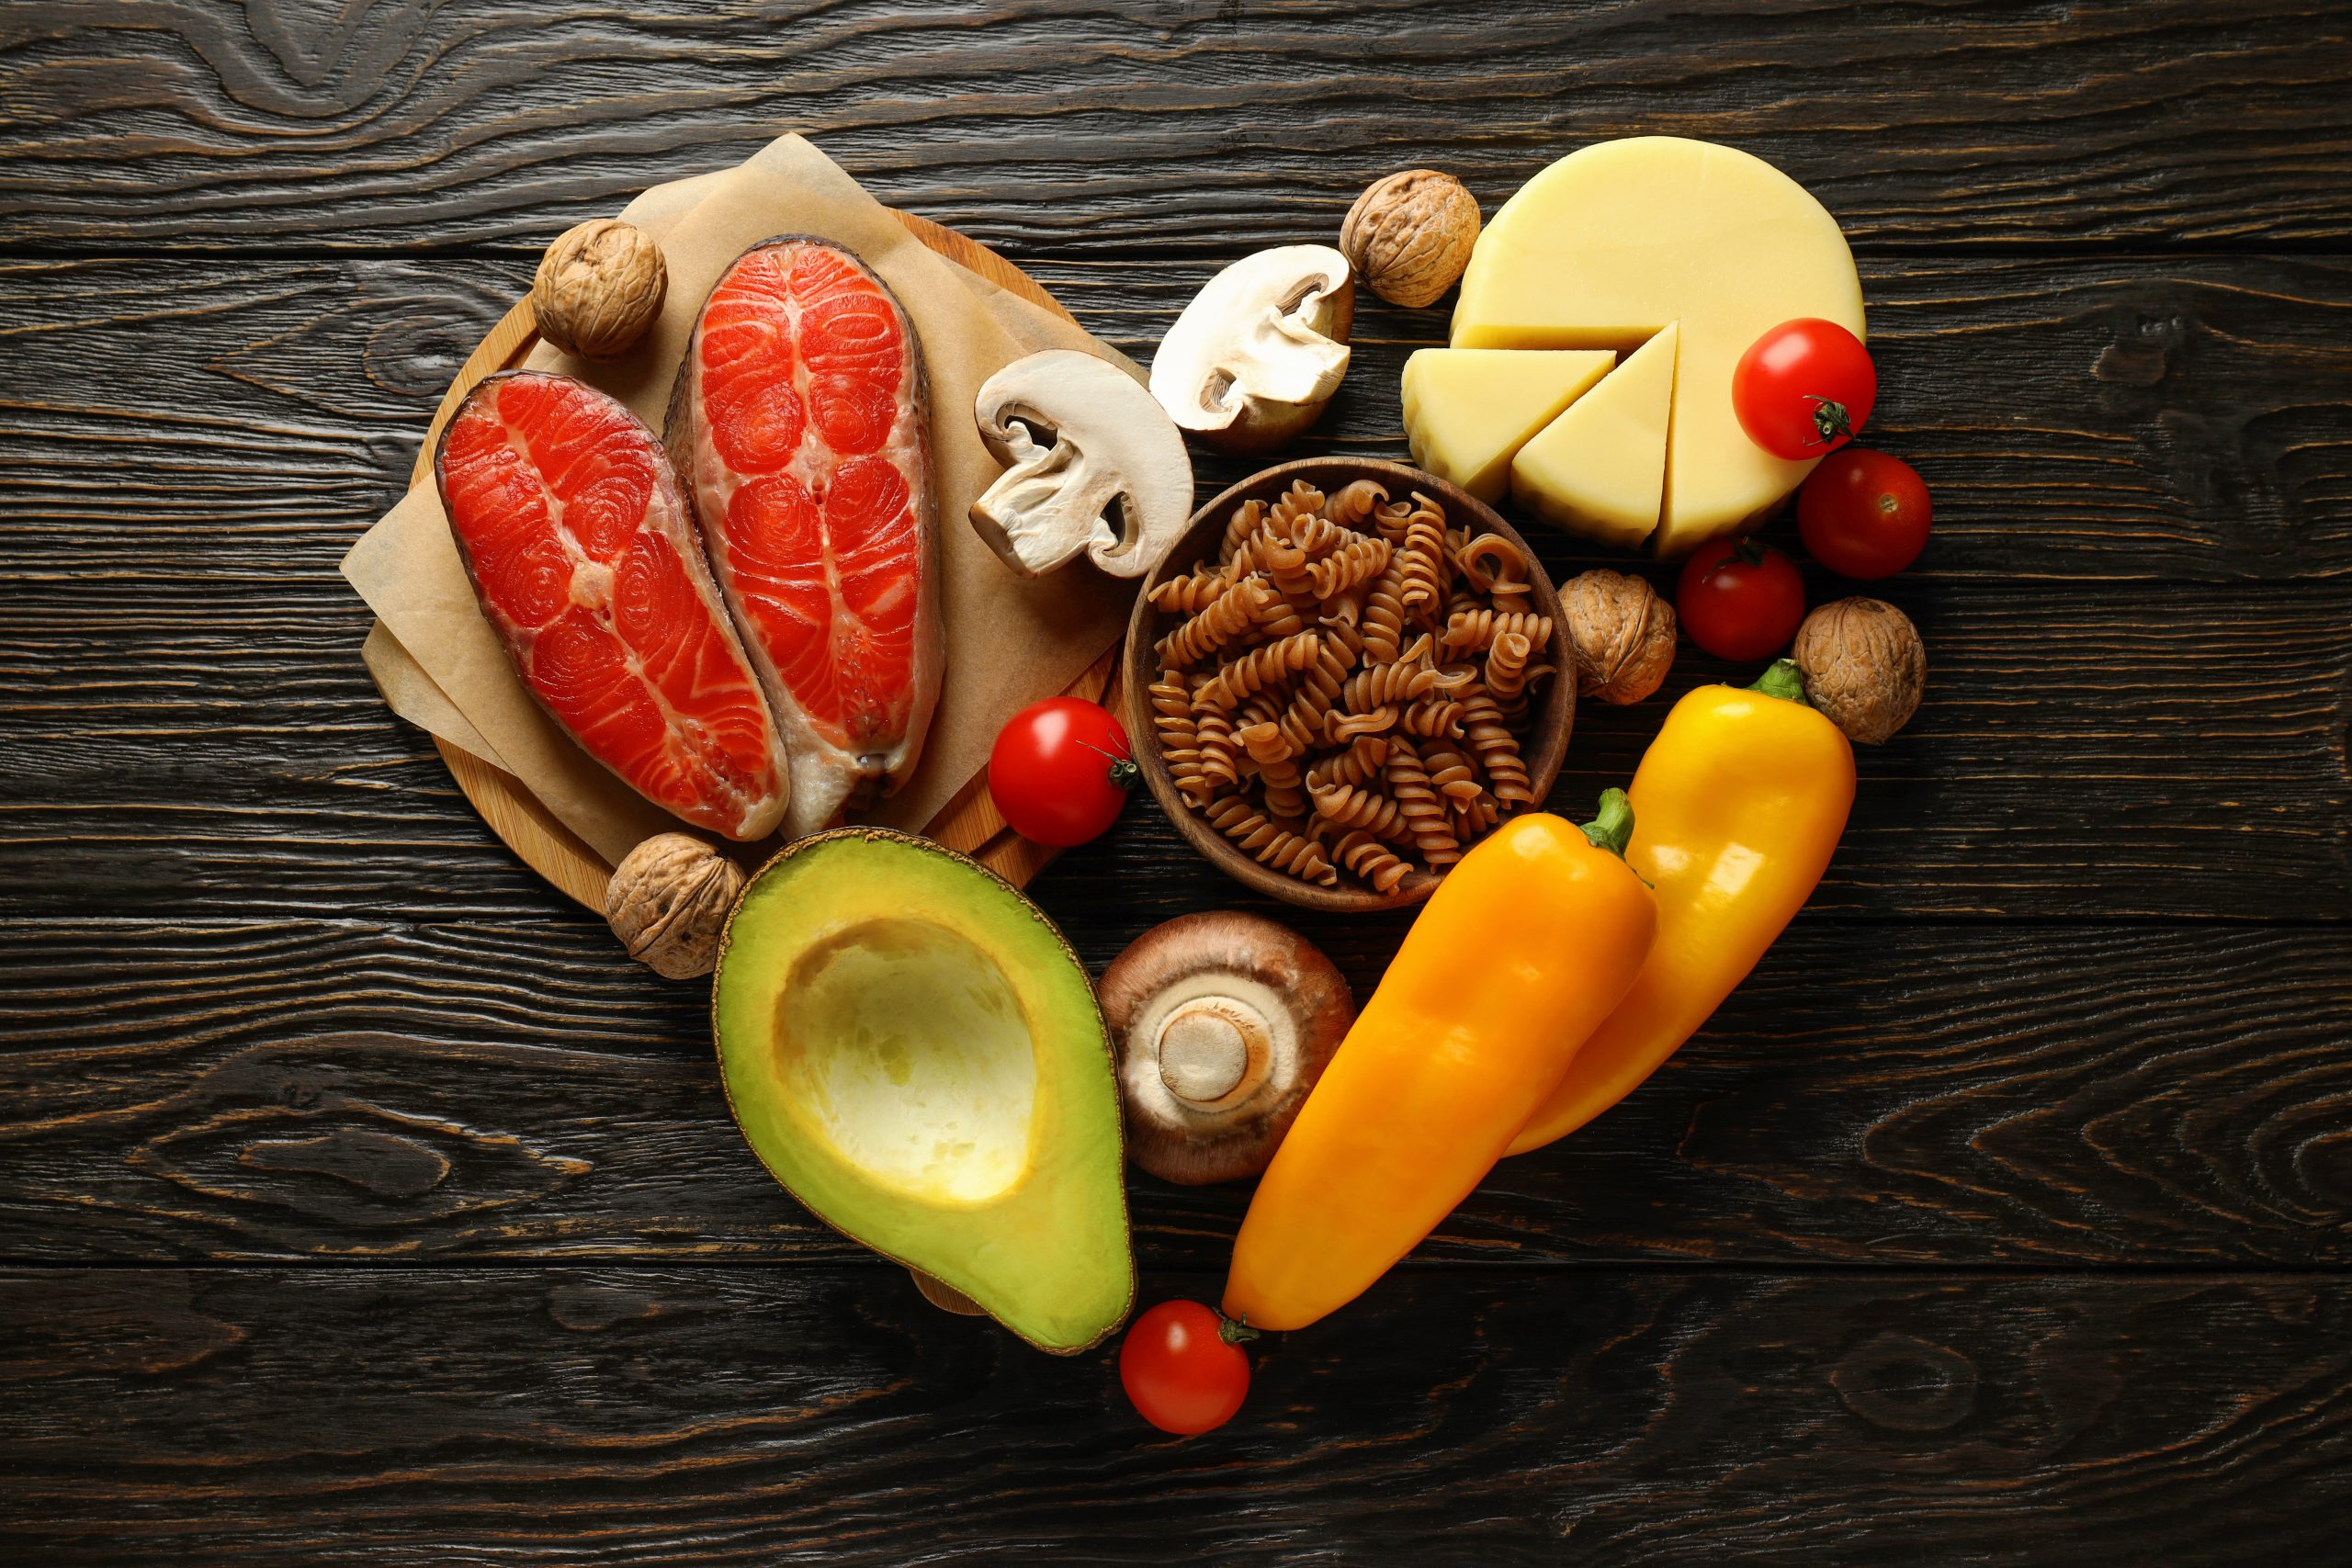 Illustration of the keto diet and heart disease impact, featuring healthy fats like avocados, nuts, and olive oil, alongside a heart symbol to represent heart health.